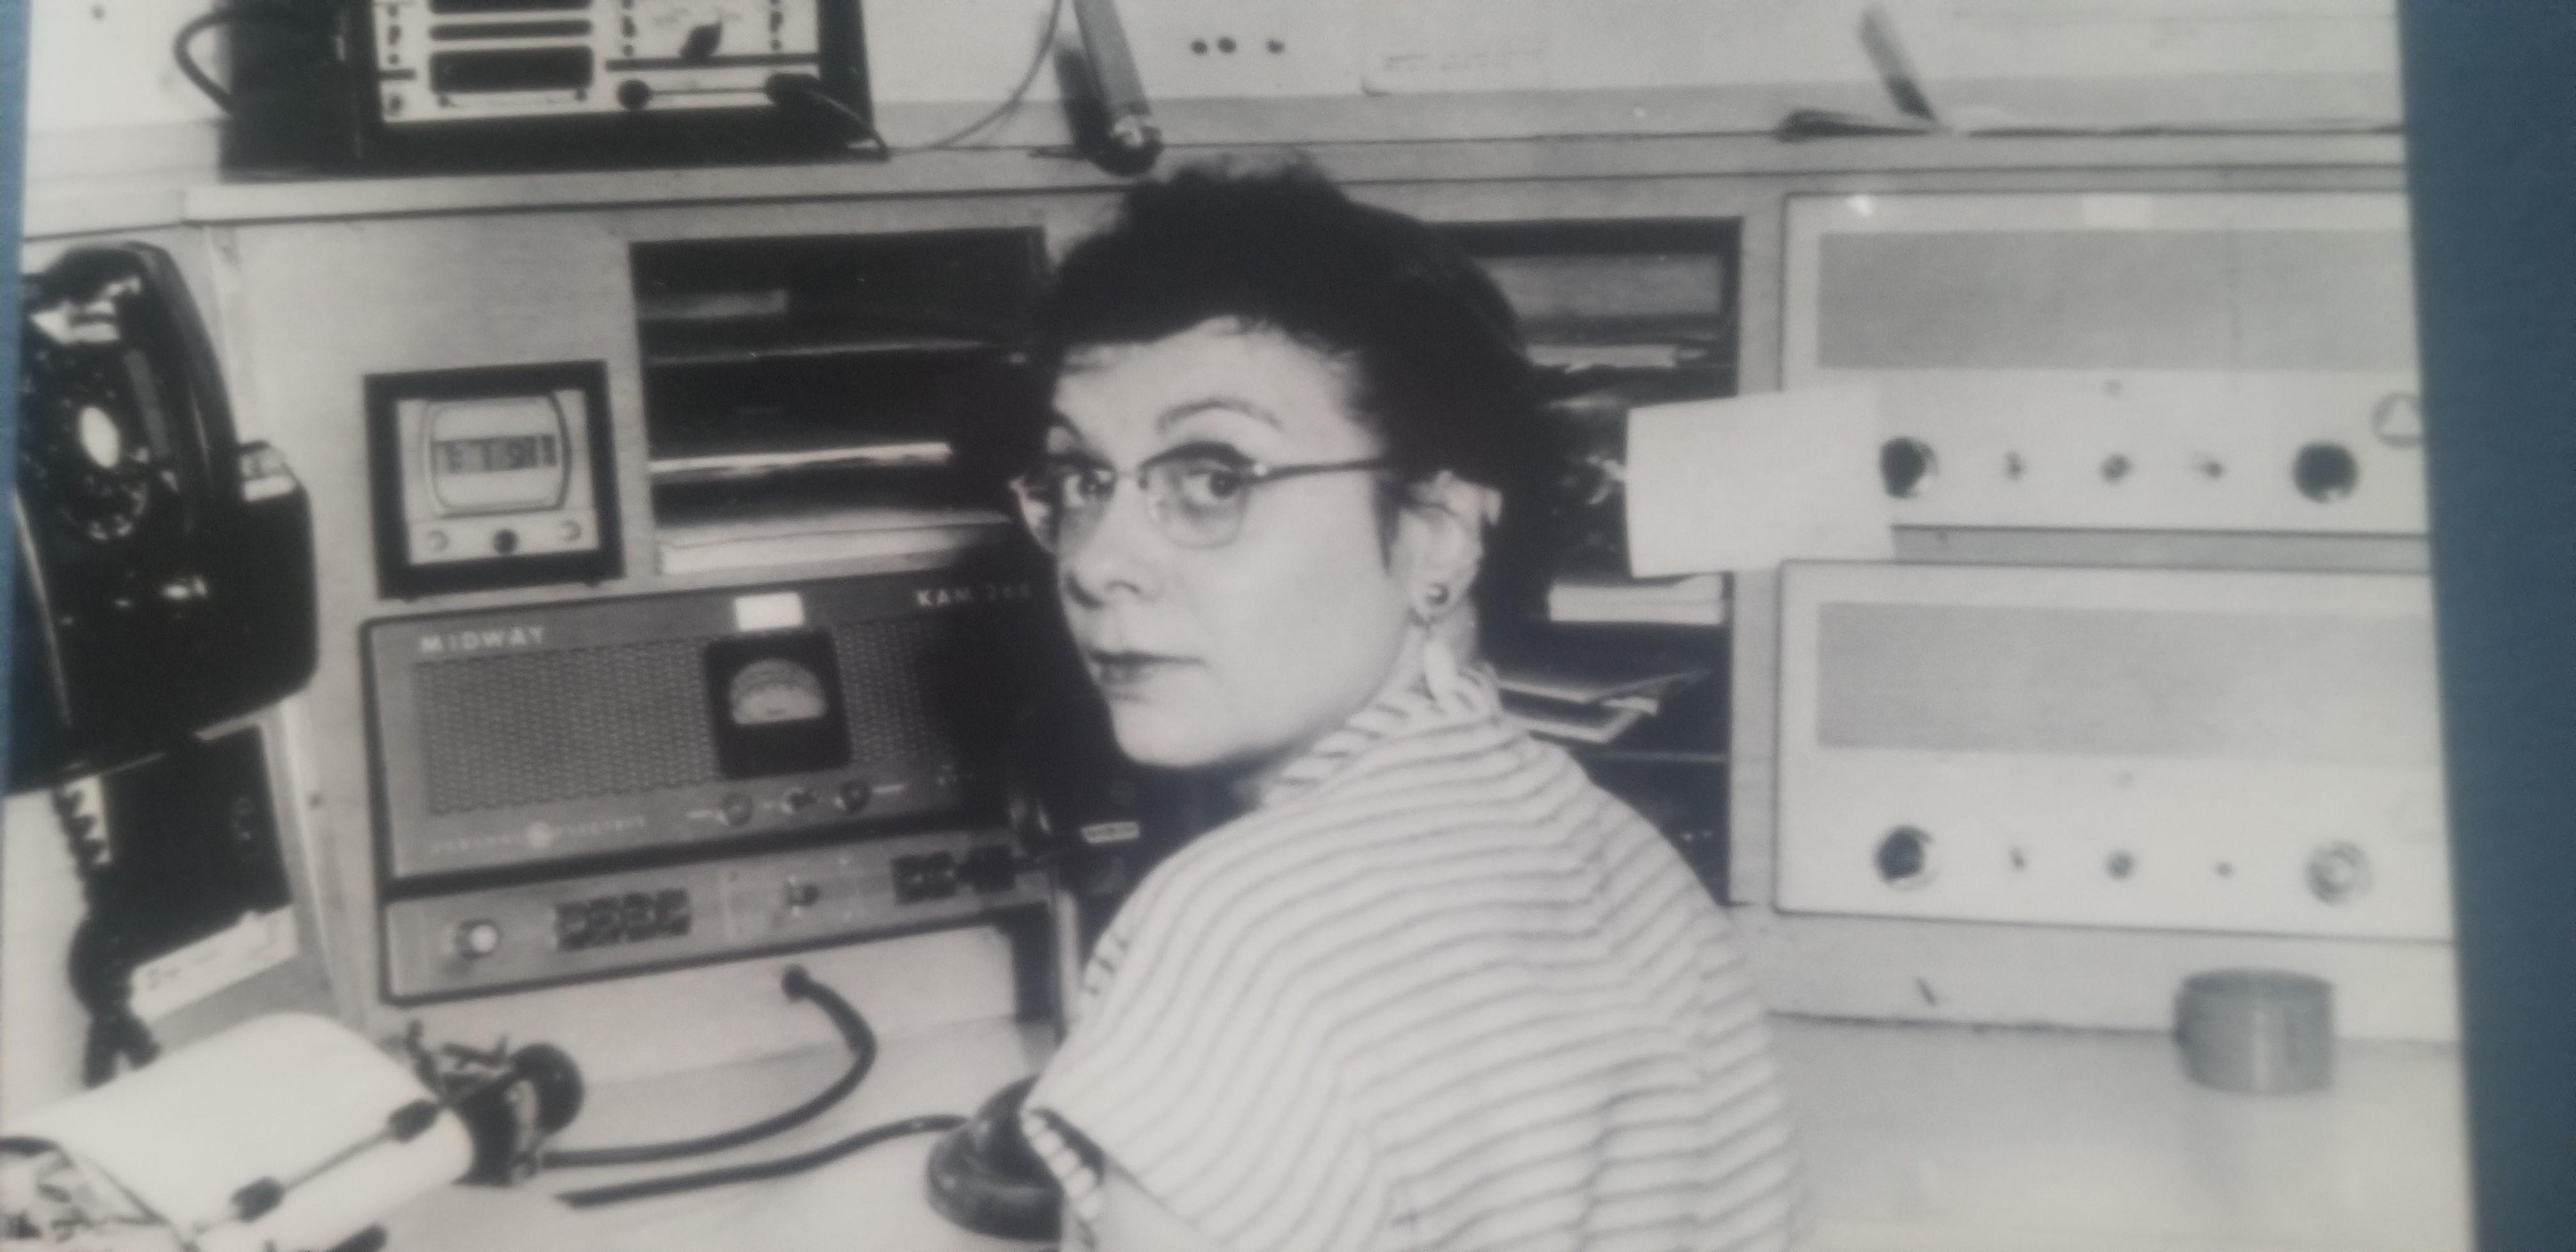 Mitzie Pernu at the radio while on the job as a 911 dispatcher in 1963